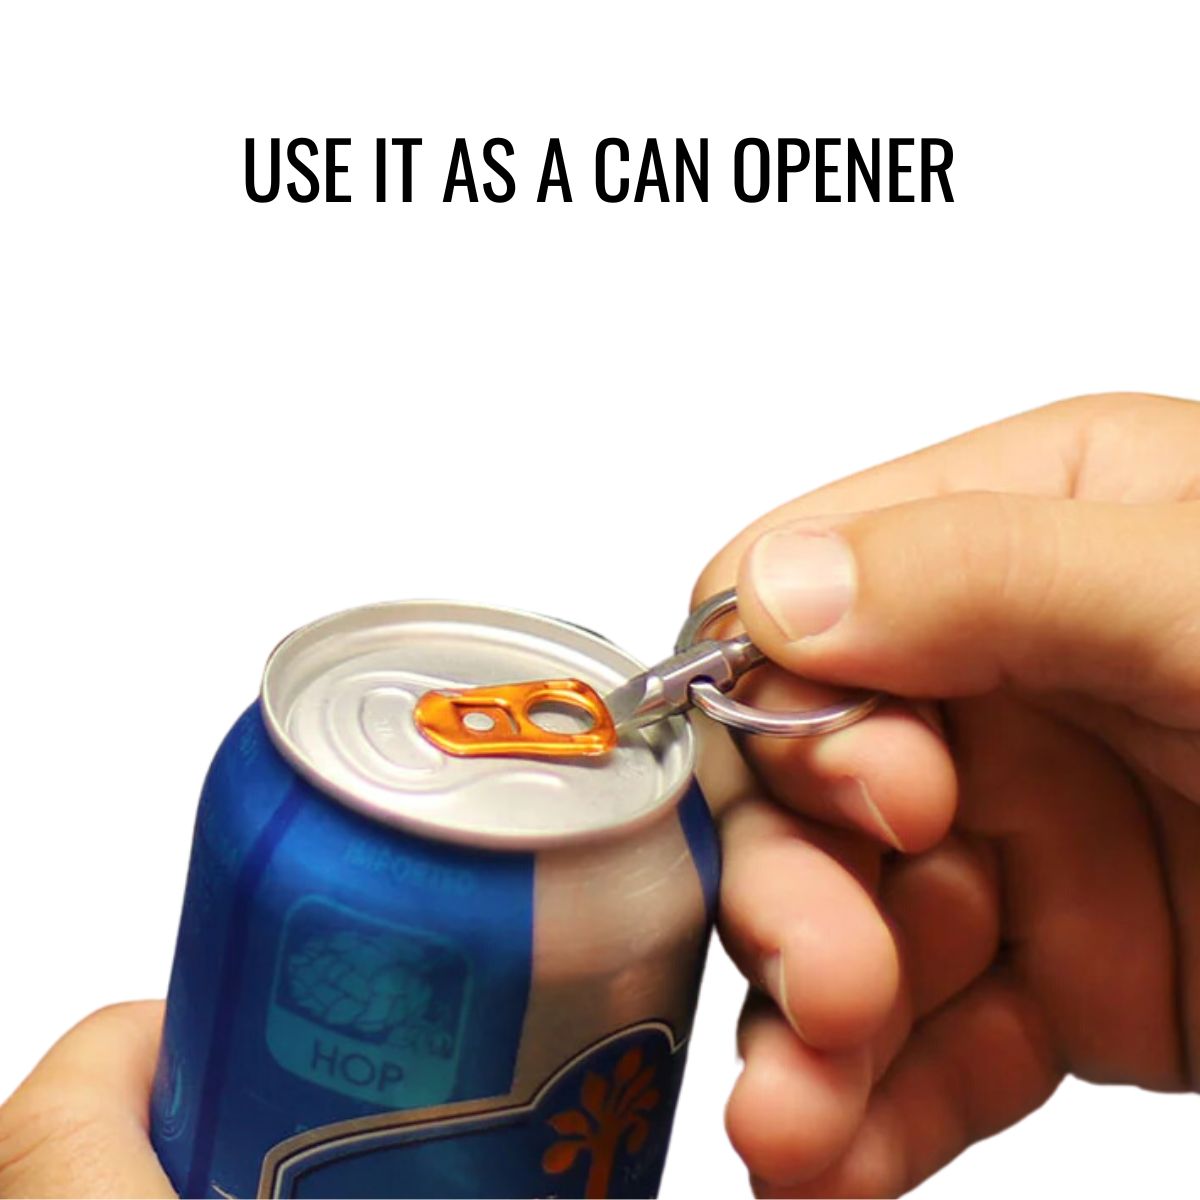 works as a can opener too!